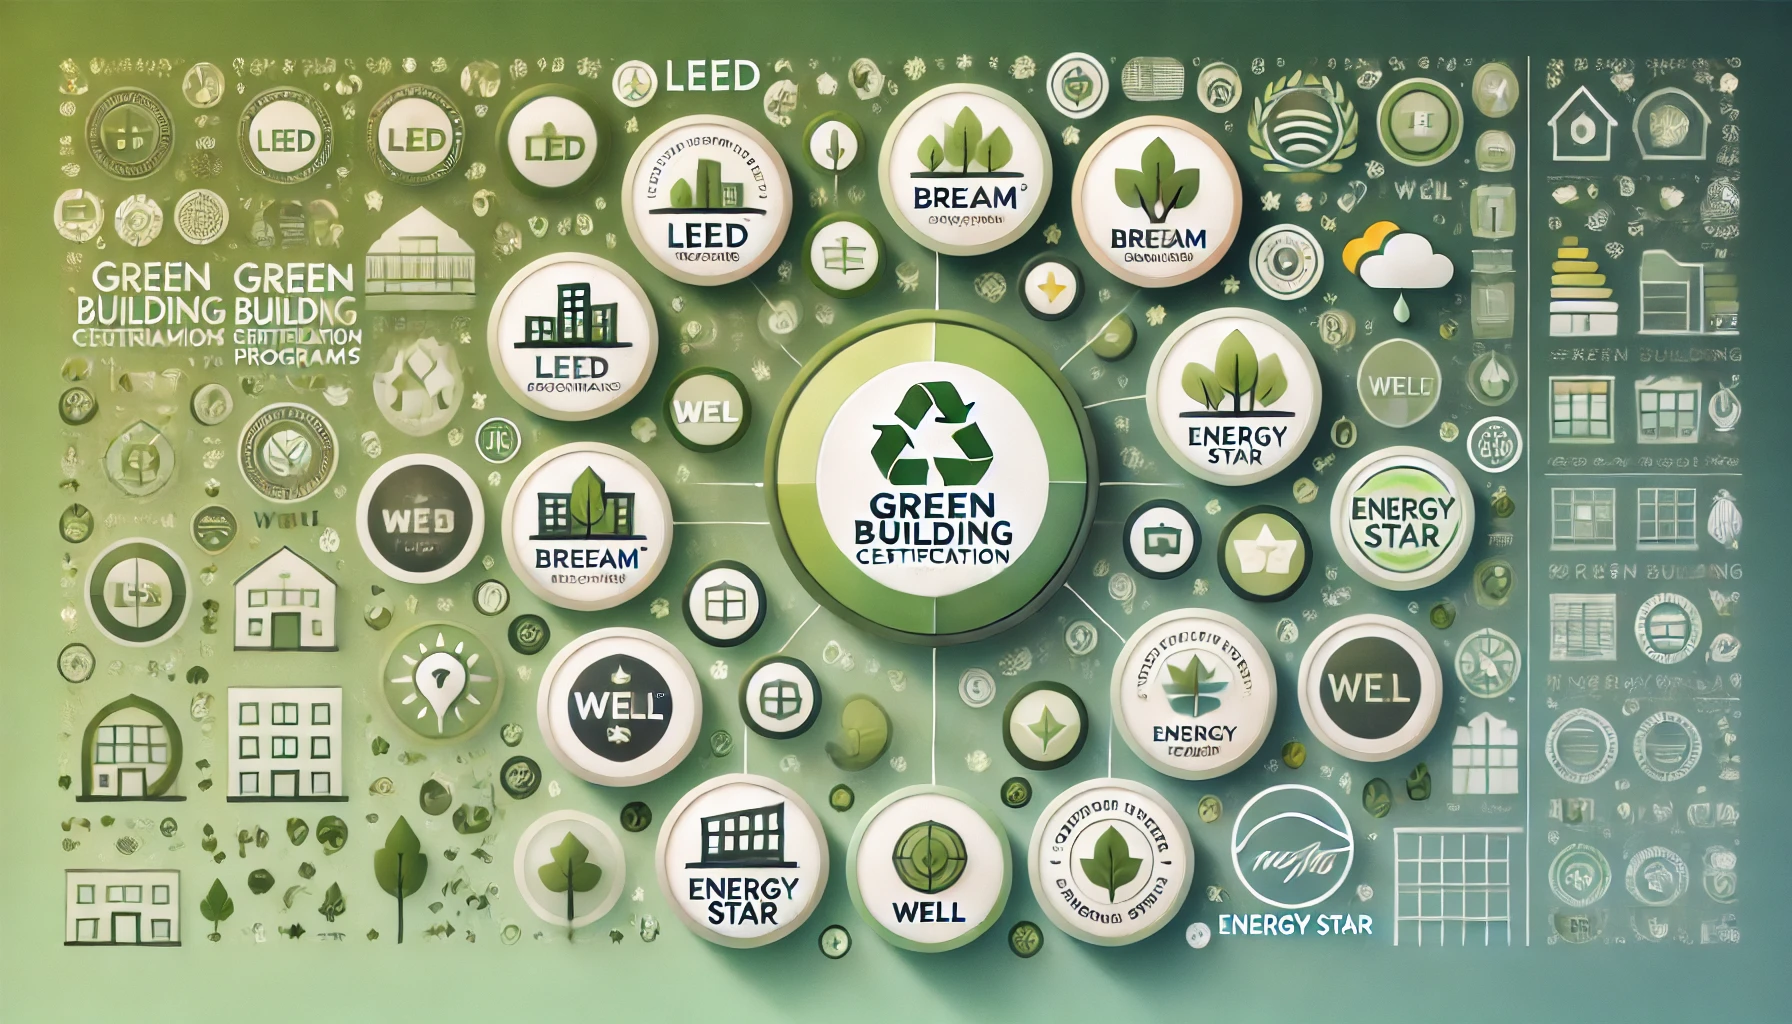 Green Building Certification Programs: LEED, BREEAM, and more